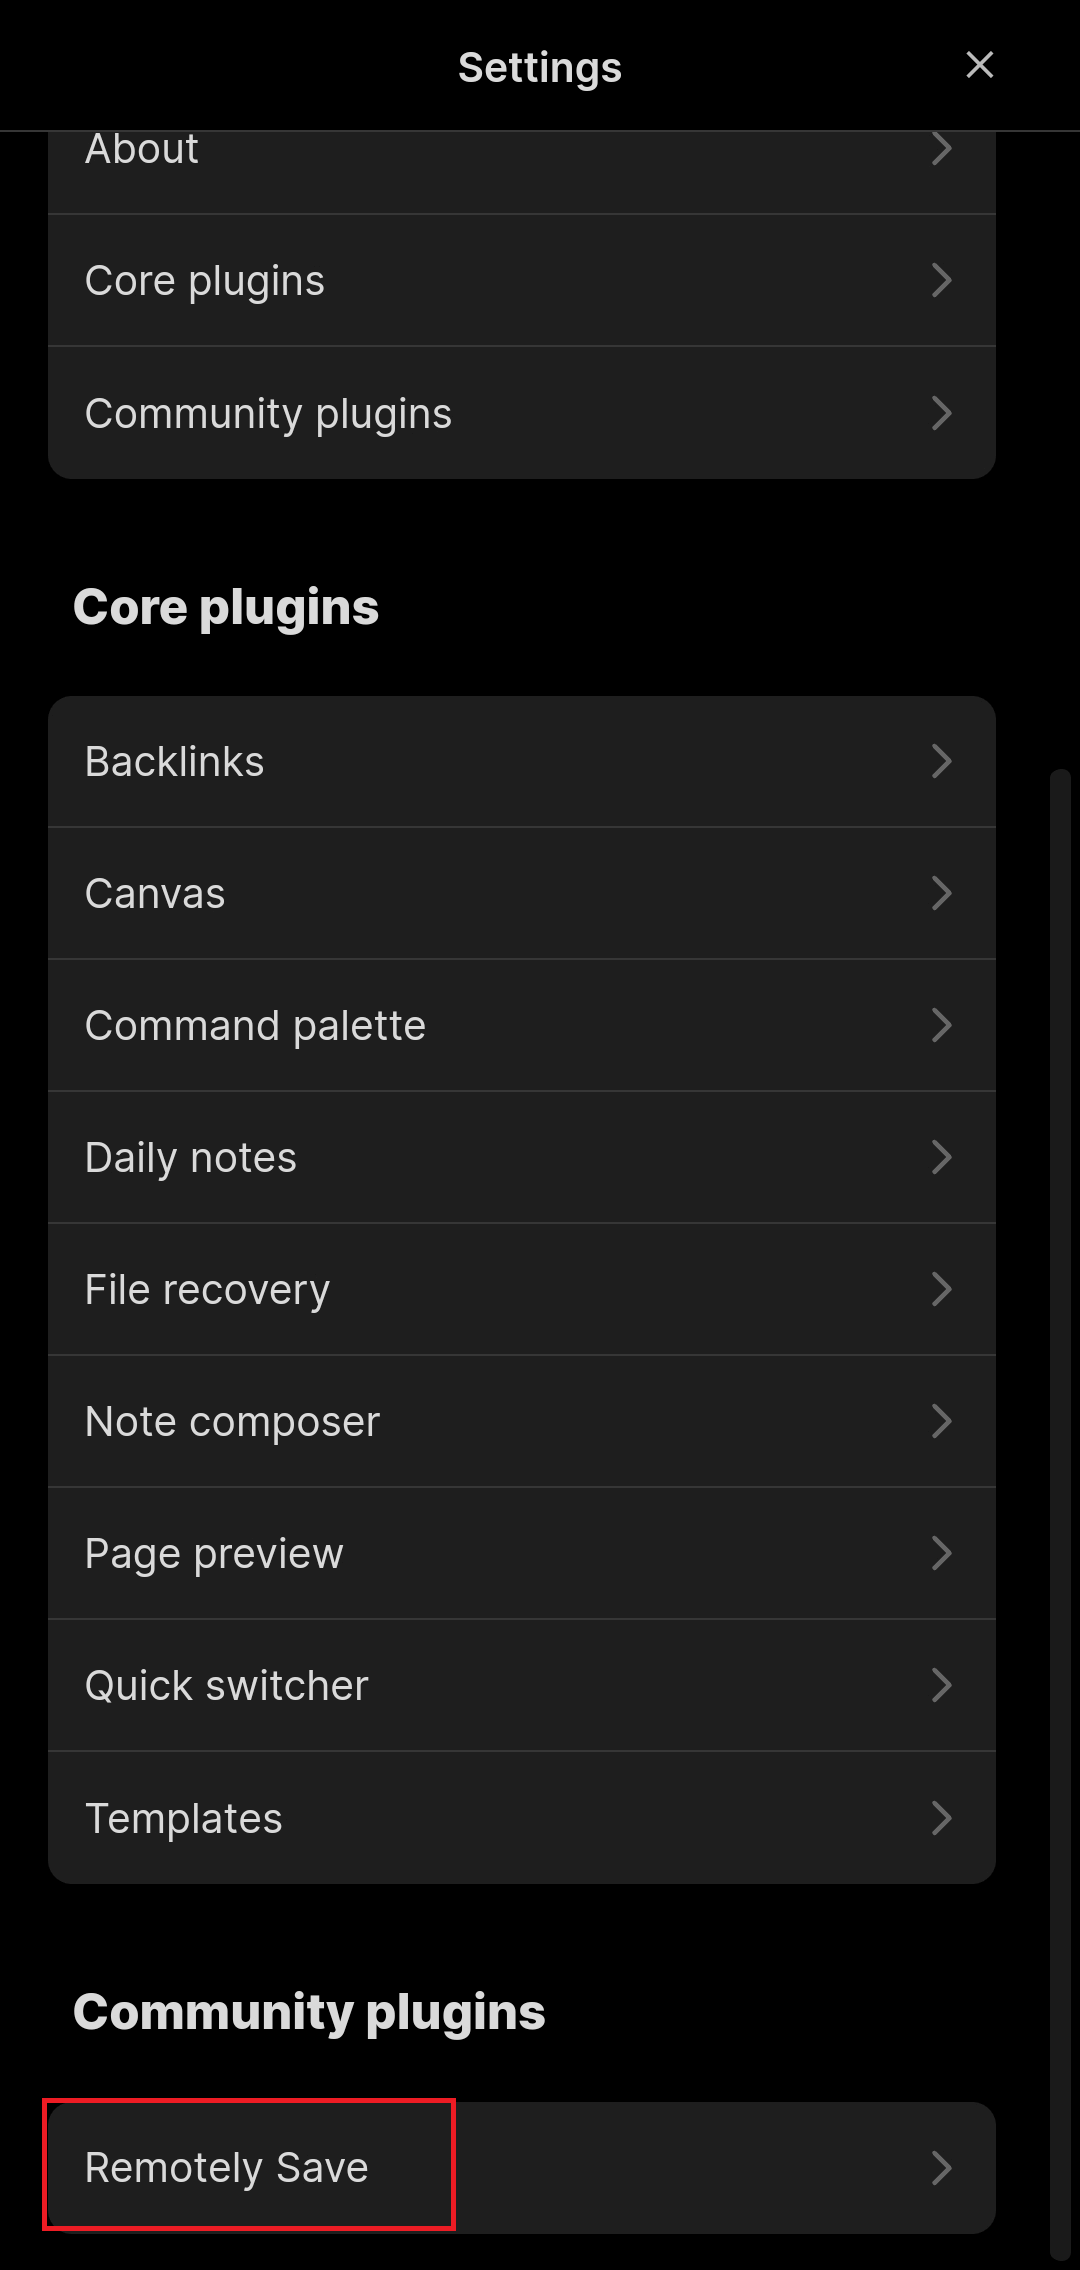 Open Remotely Save plugin in Obsidian by scrolling to the bottom of the settings